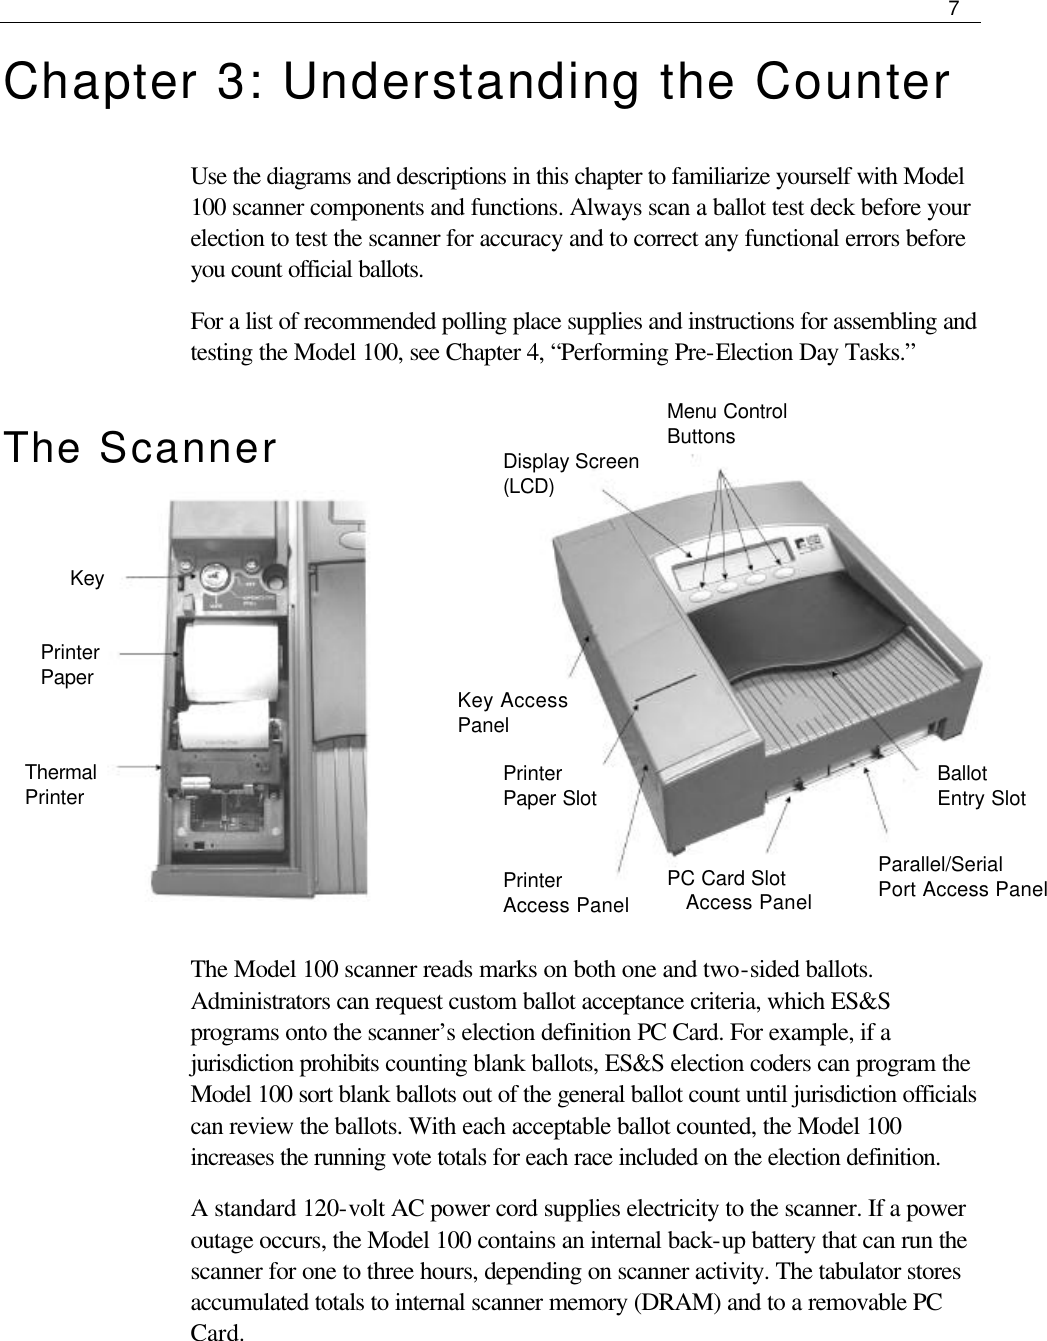     7  Chapter 3: Understanding the Counter Use the diagrams and descriptions in this chapter to familiarize yourself with Model 100 scanner components and functions. Always scan a ballot test deck before your election to test the scanner for accuracy and to correct any functional errors before you count official ballots.   For a list of recommended polling place supplies and instructions for assembling and testing the Model 100, see Chapter 4, “Performing Pre-Election Day Tasks.” The Scanner          The Model 100 scanner reads marks on both one and two-sided ballots. Administrators can request custom ballot acceptance criteria, which ES&amp;S programs onto the scanner’s election definition PC Card. For example, if a jurisdiction prohibits counting blank ballots, ES&amp;S election coders can program the Model 100 sort blank ballots out of the general ballot count until jurisdiction officials can review the ballots. With each acceptable ballot counted, the Model 100 increases the running vote totals for each race included on the election definition.  A standard 120-volt AC power cord supplies electricity to the scanner. If a power outage occurs, the Model 100 contains an internal back-up battery that can run the scanner for one to three hours, depending on scanner activity. The tabulator stores accumulated totals to internal scanner memory (DRAM) and to a removable PC Card.    Key Printer Paper Thermal Printer  Display Screen (LCD) Menu Control Buttons Ballot Entry Slot Parallel/Serial Port Access Panel PC Card Slot Access Panel Printer  Access Panel Printer Paper Slot Key Access Panel 